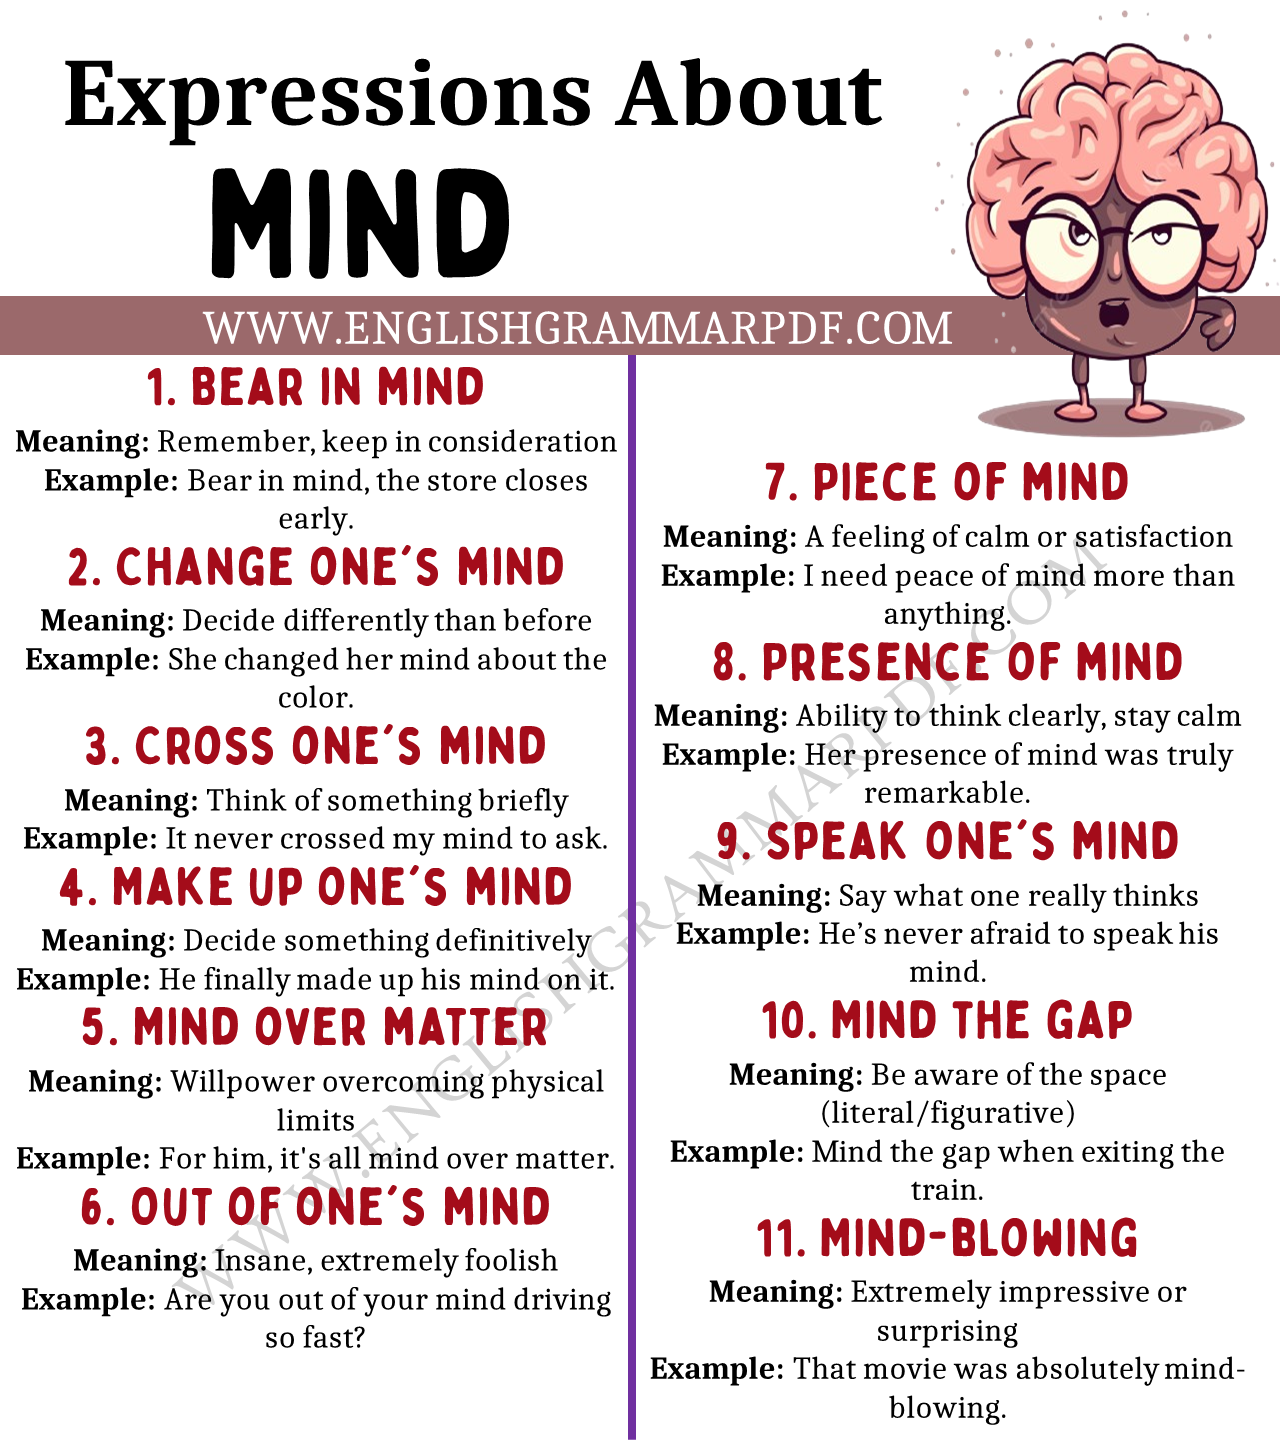 Expressions About “Mind”